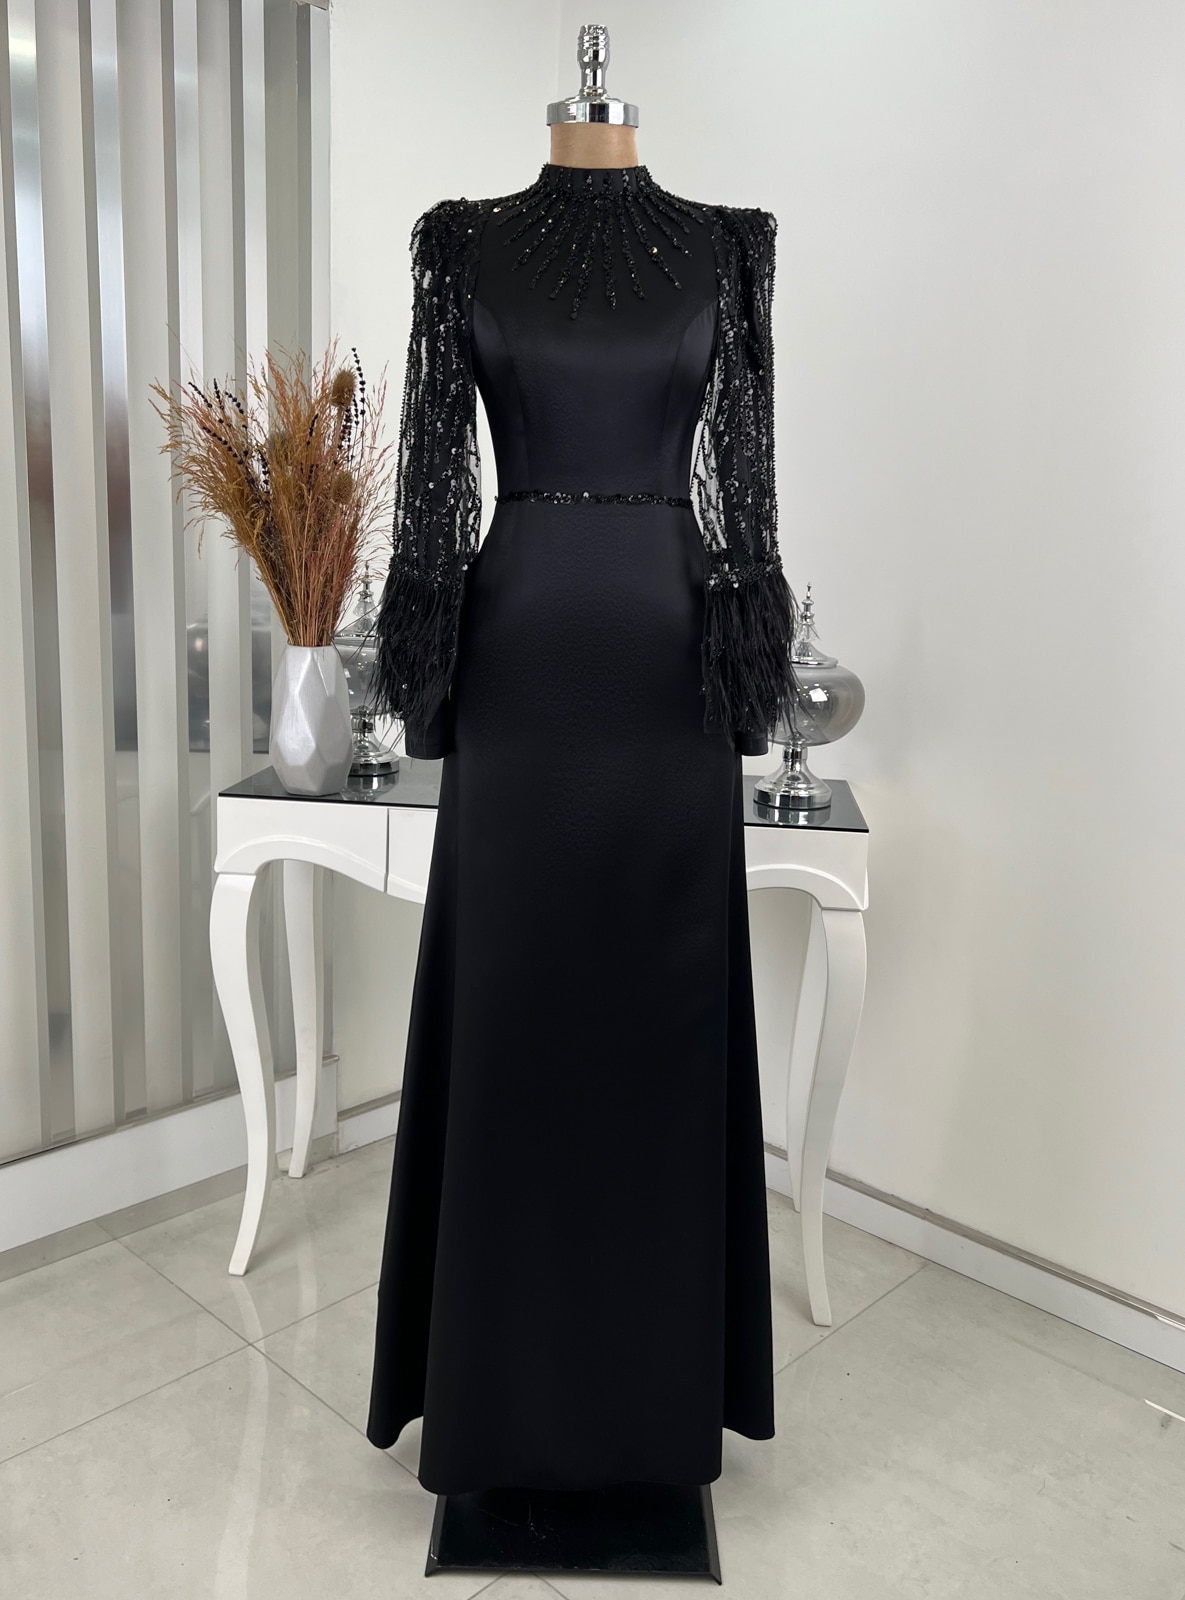 Black - Fully Lined - Fully Lined - Crew neck - Crew neck - Modest Evening Dress